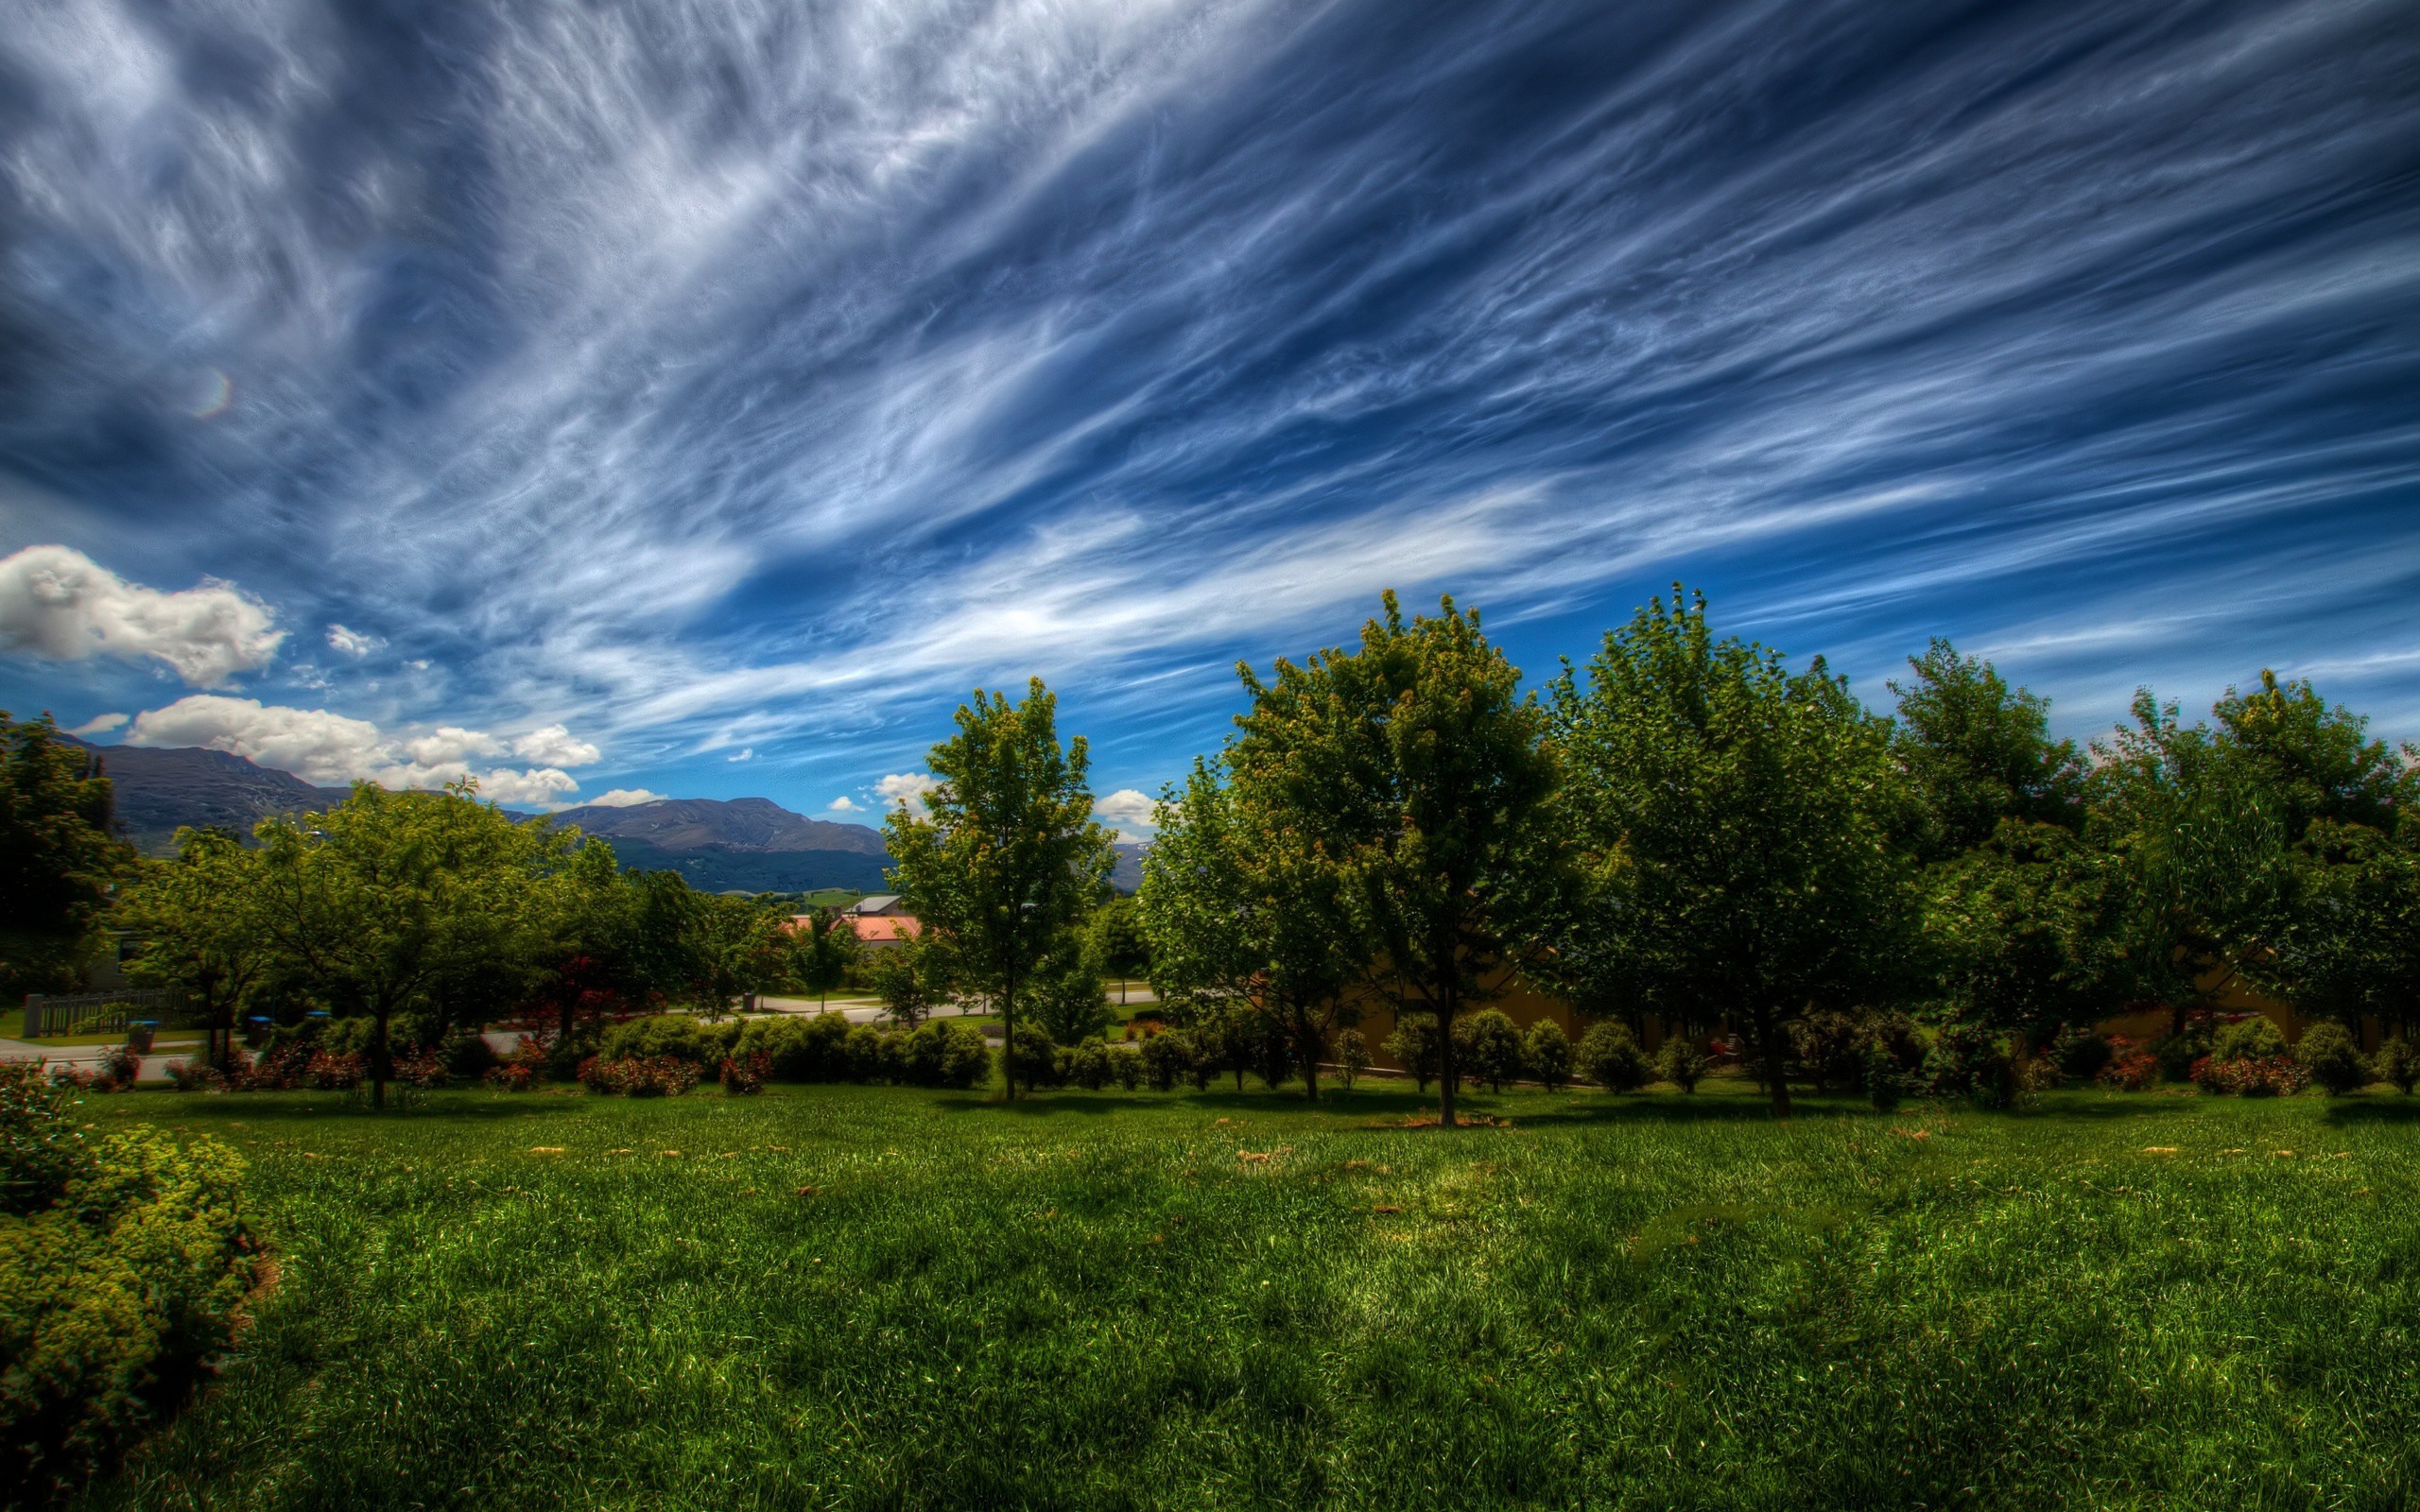 General 2560x1600 nature landscape trees grass clouds